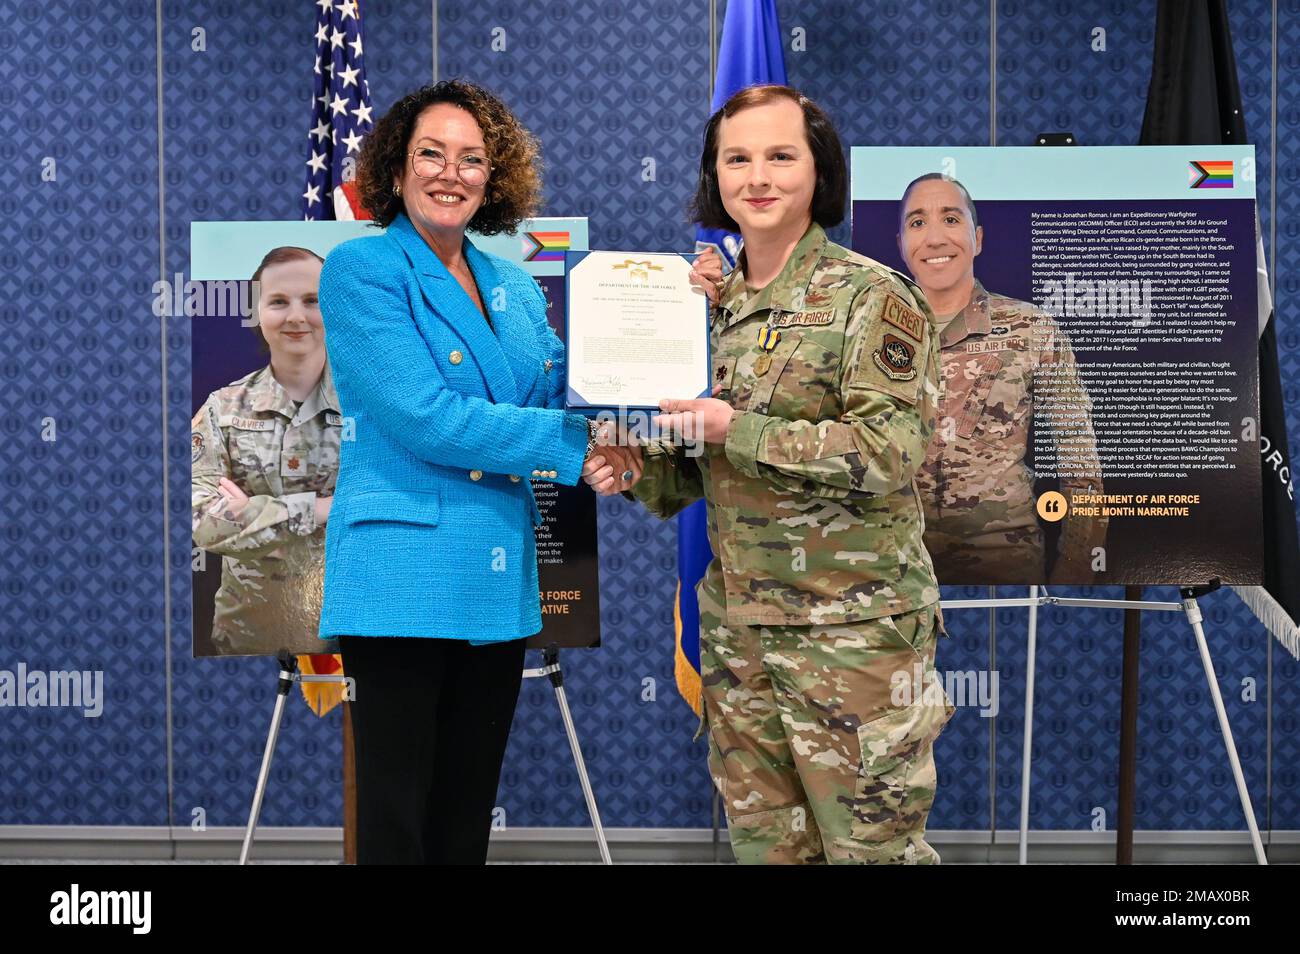 Marianne Malizia, director of diversity and inclusion for the Air Force,  presents the Air and Space Force Commendation Medal to Maj. Julie Clavier  during a Department of the Air Force Pride celebration